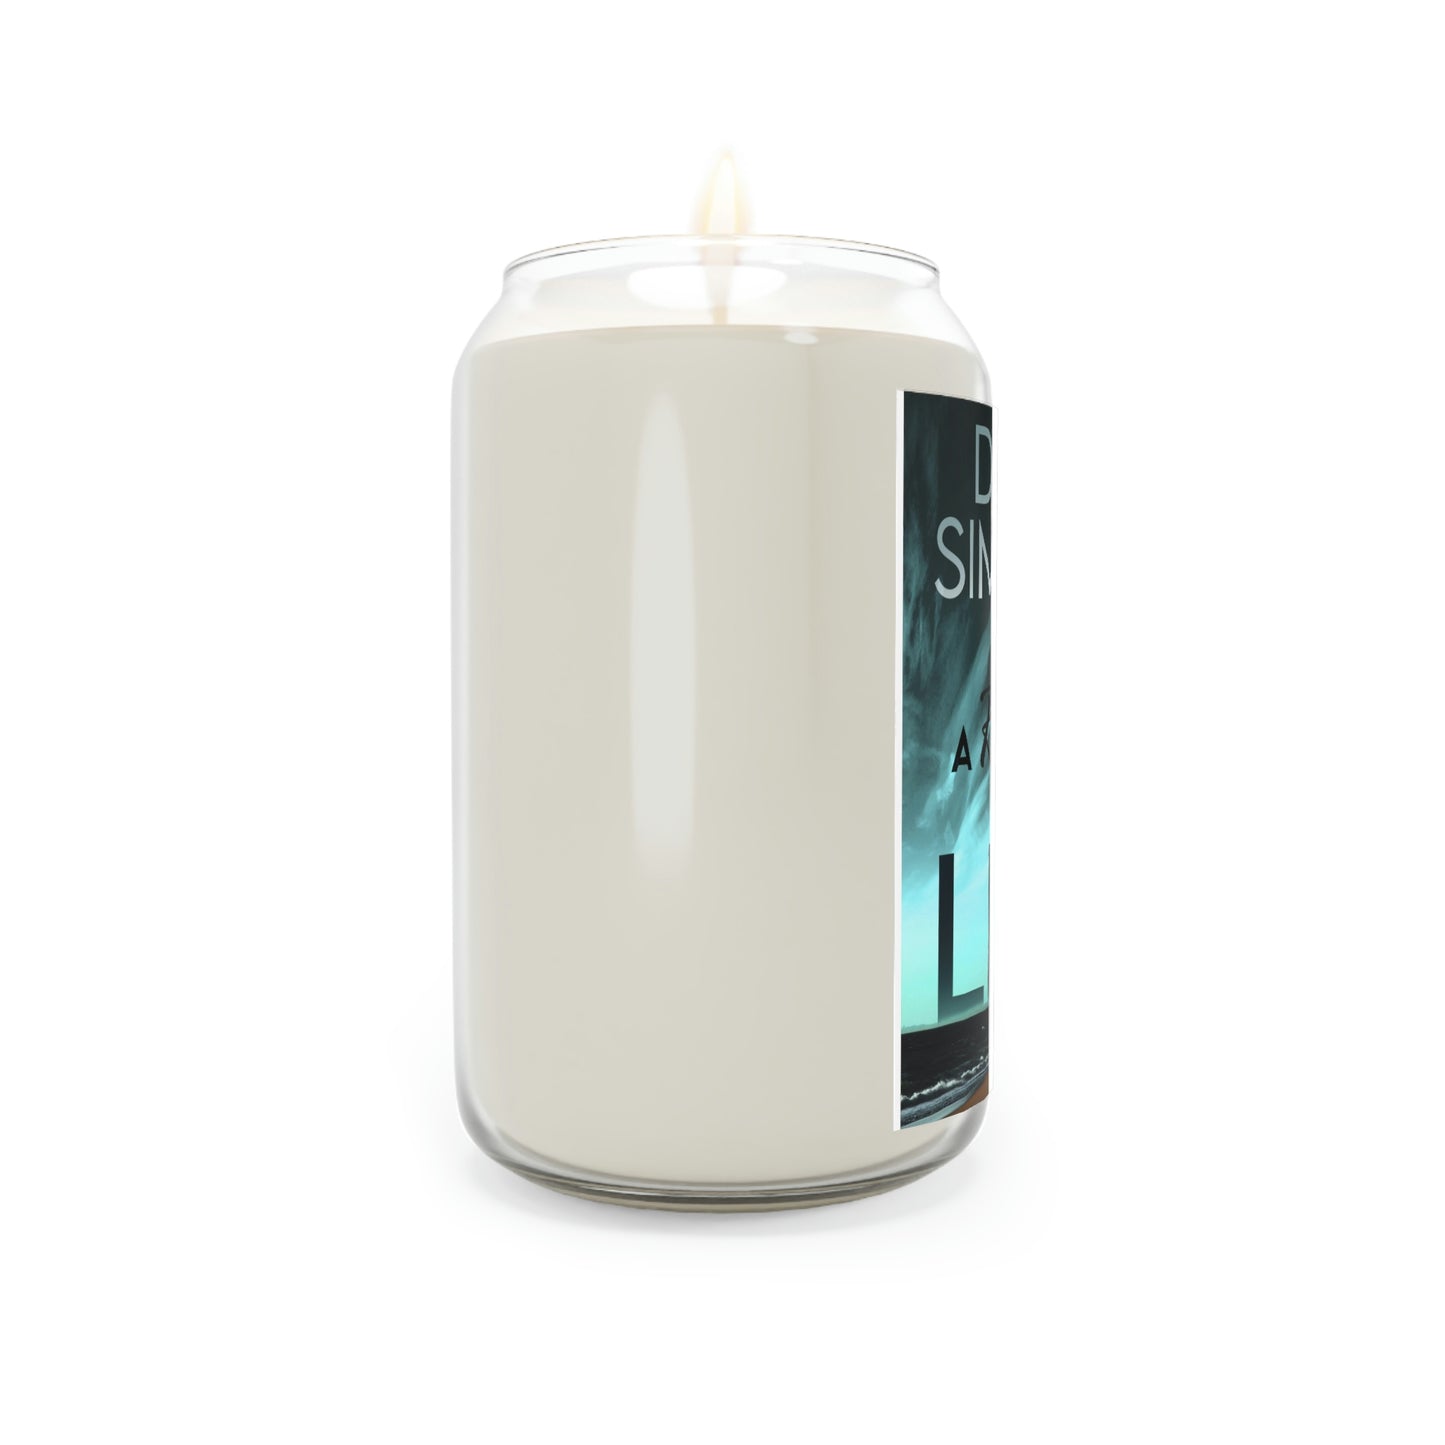 A Reason To Live - Scented Candle